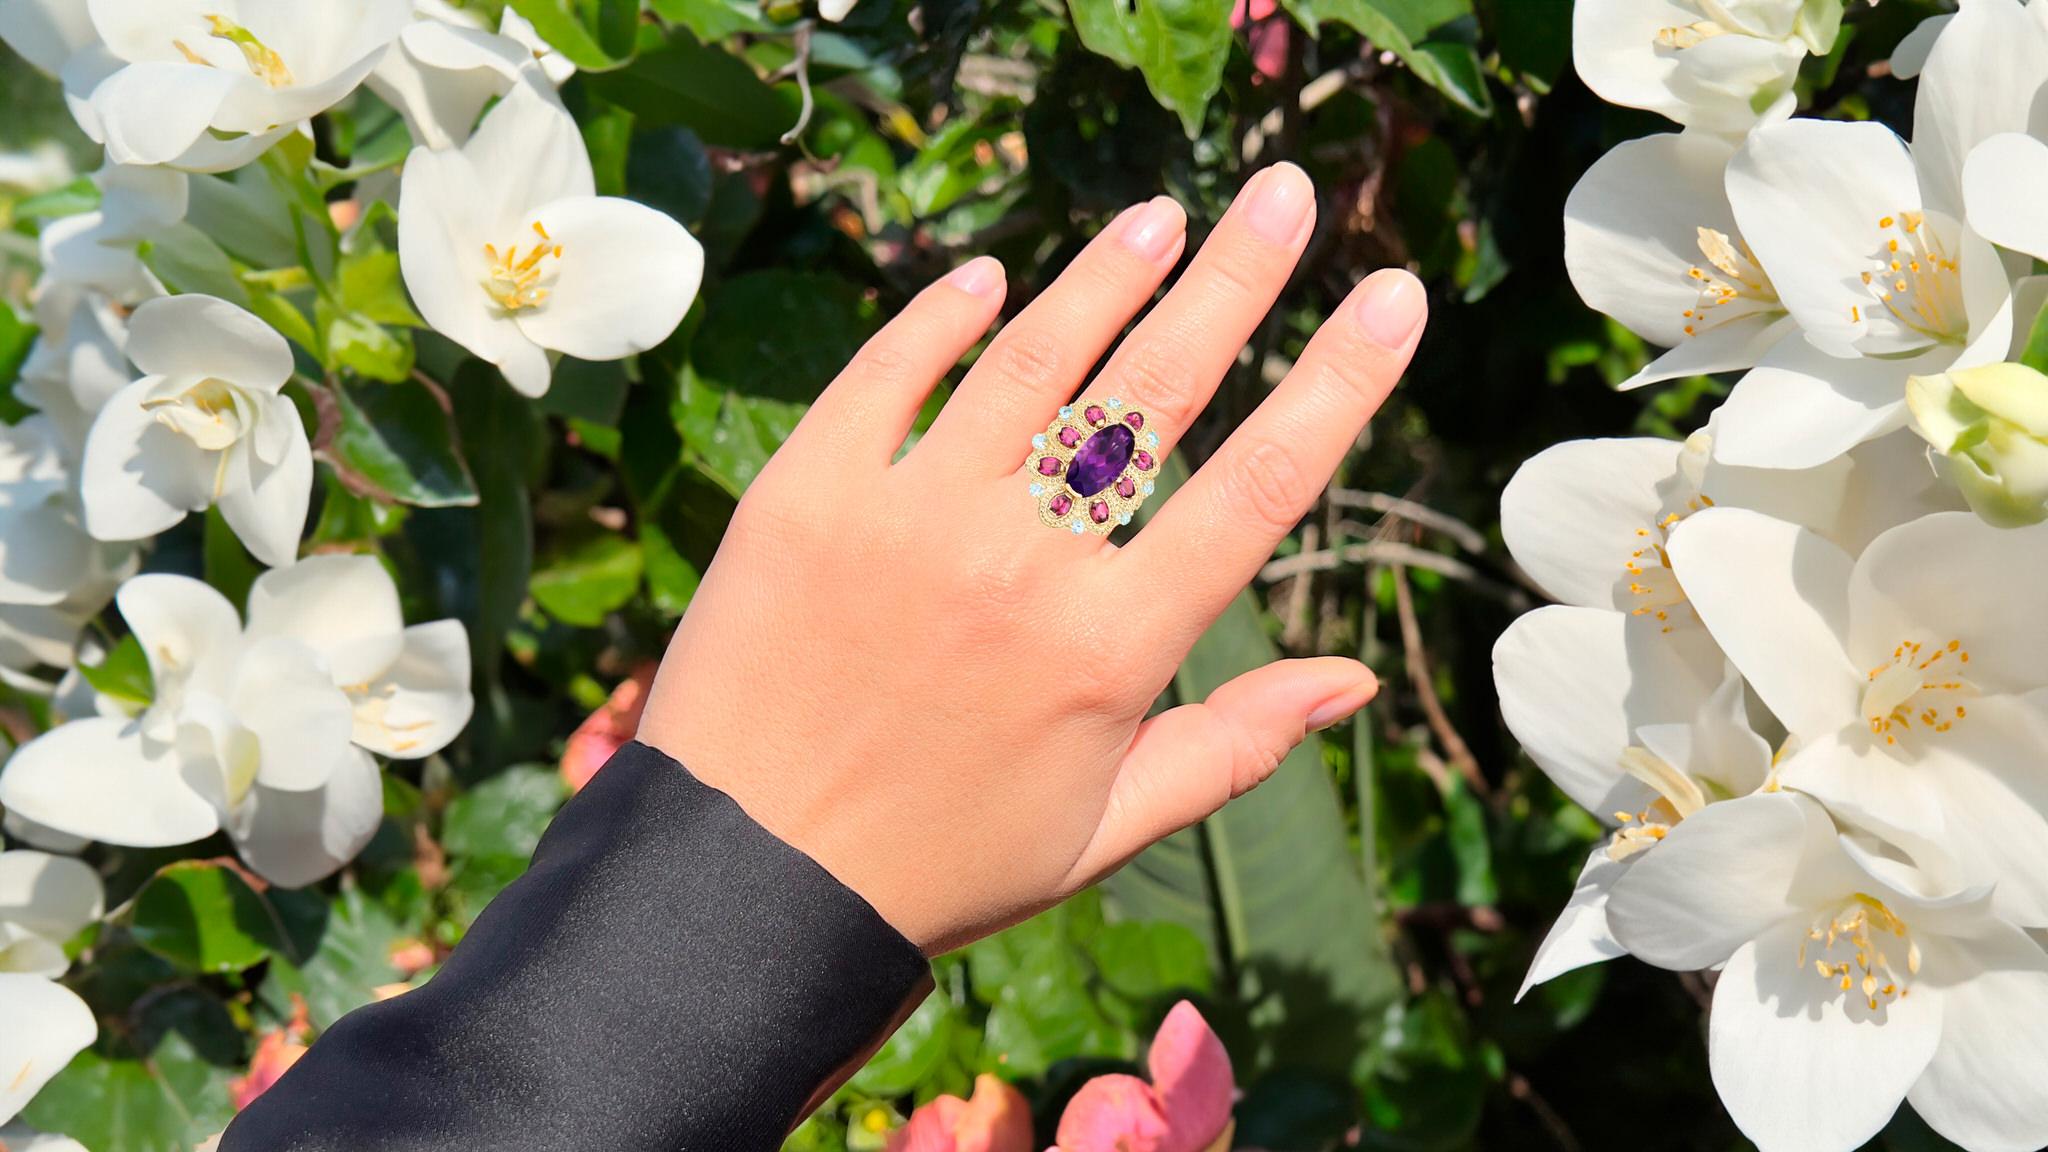 It comes with the Gemological Appraisal by GIA GG/AJP
All Gemstones are Natural
Amethyst = 6.80 Carat
Rhodolite Garnets = 1.70 Carats
Blue Topazes = 0.60 Carats
Metal: 14K Yellow Gold Plated Sterling Silver
Ring Size: 8* US
*It can be resized